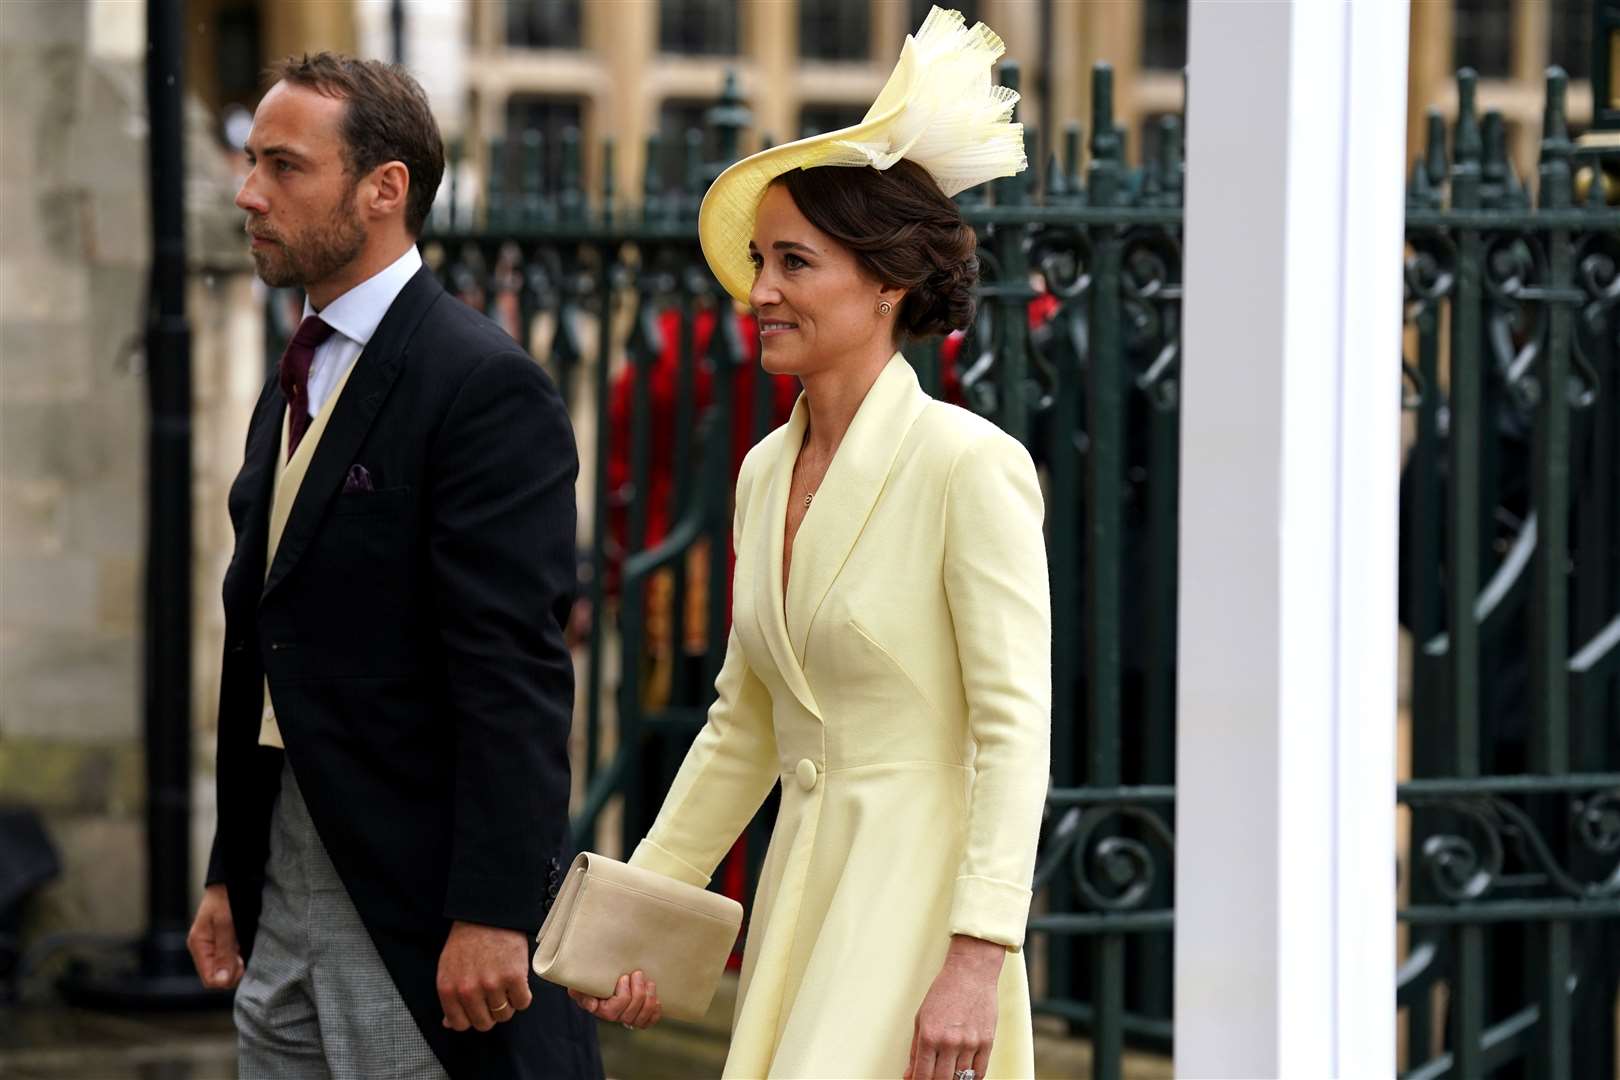 James and Pippa Middleton arriving at Westminster Abbey ahead of the coronation ceremony of King Charles III and Queen Camilla (Andrew Milligan/PA)